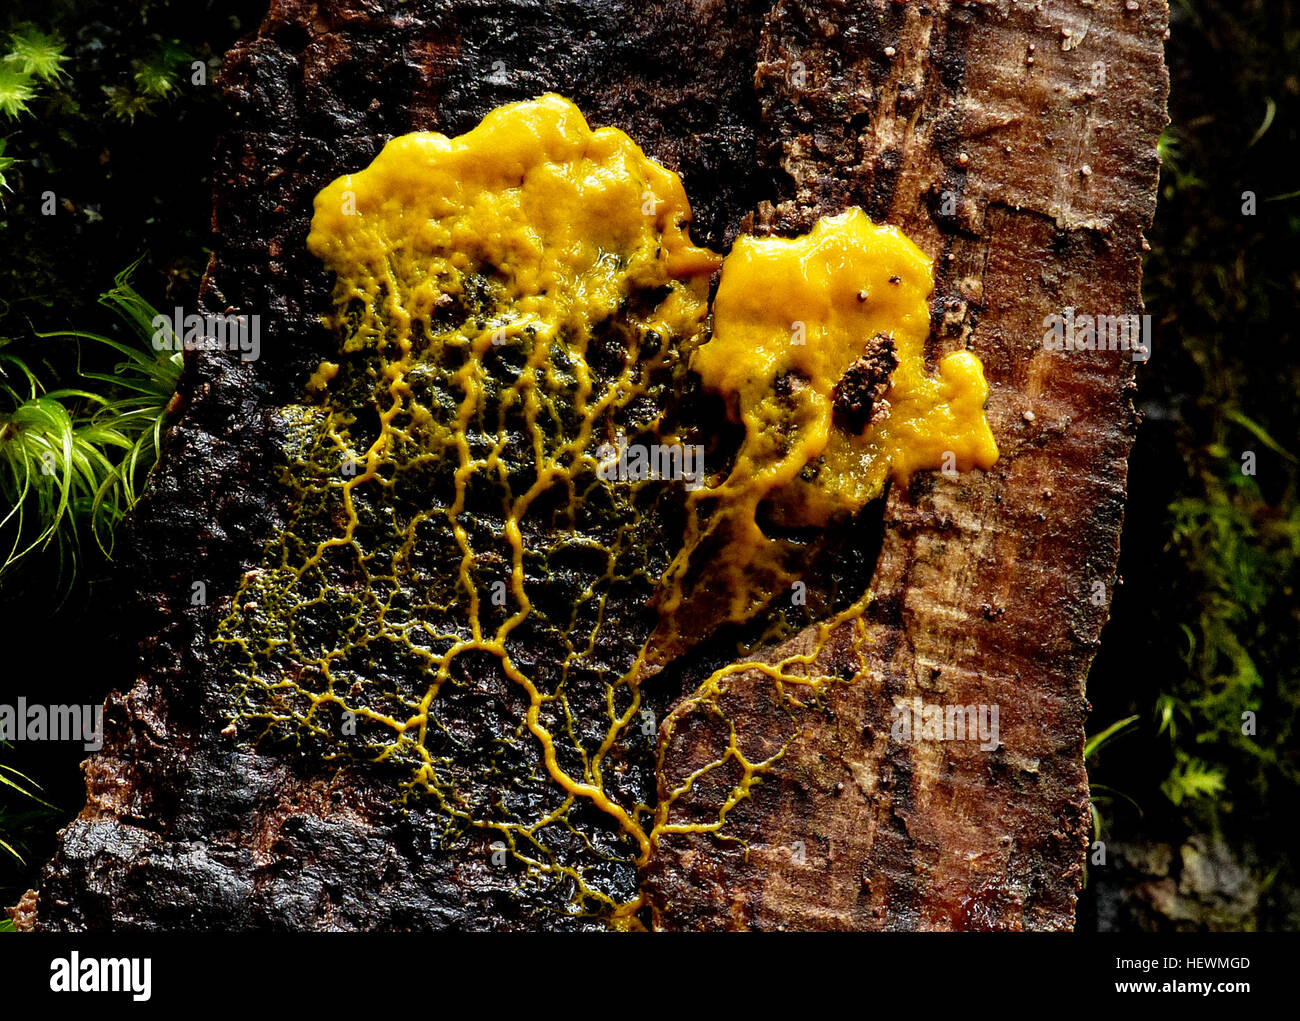 Slime mold or slime mould is a broad term describing some organisms that use spores to reproduce. Slime molds were formerly classified as fungi but are no longer considered part of this kingdom.  Although not related to one another, they are still sometimes grouped for convenience within the paraphyletic group referred to as kingdom Protista. Stock Photo